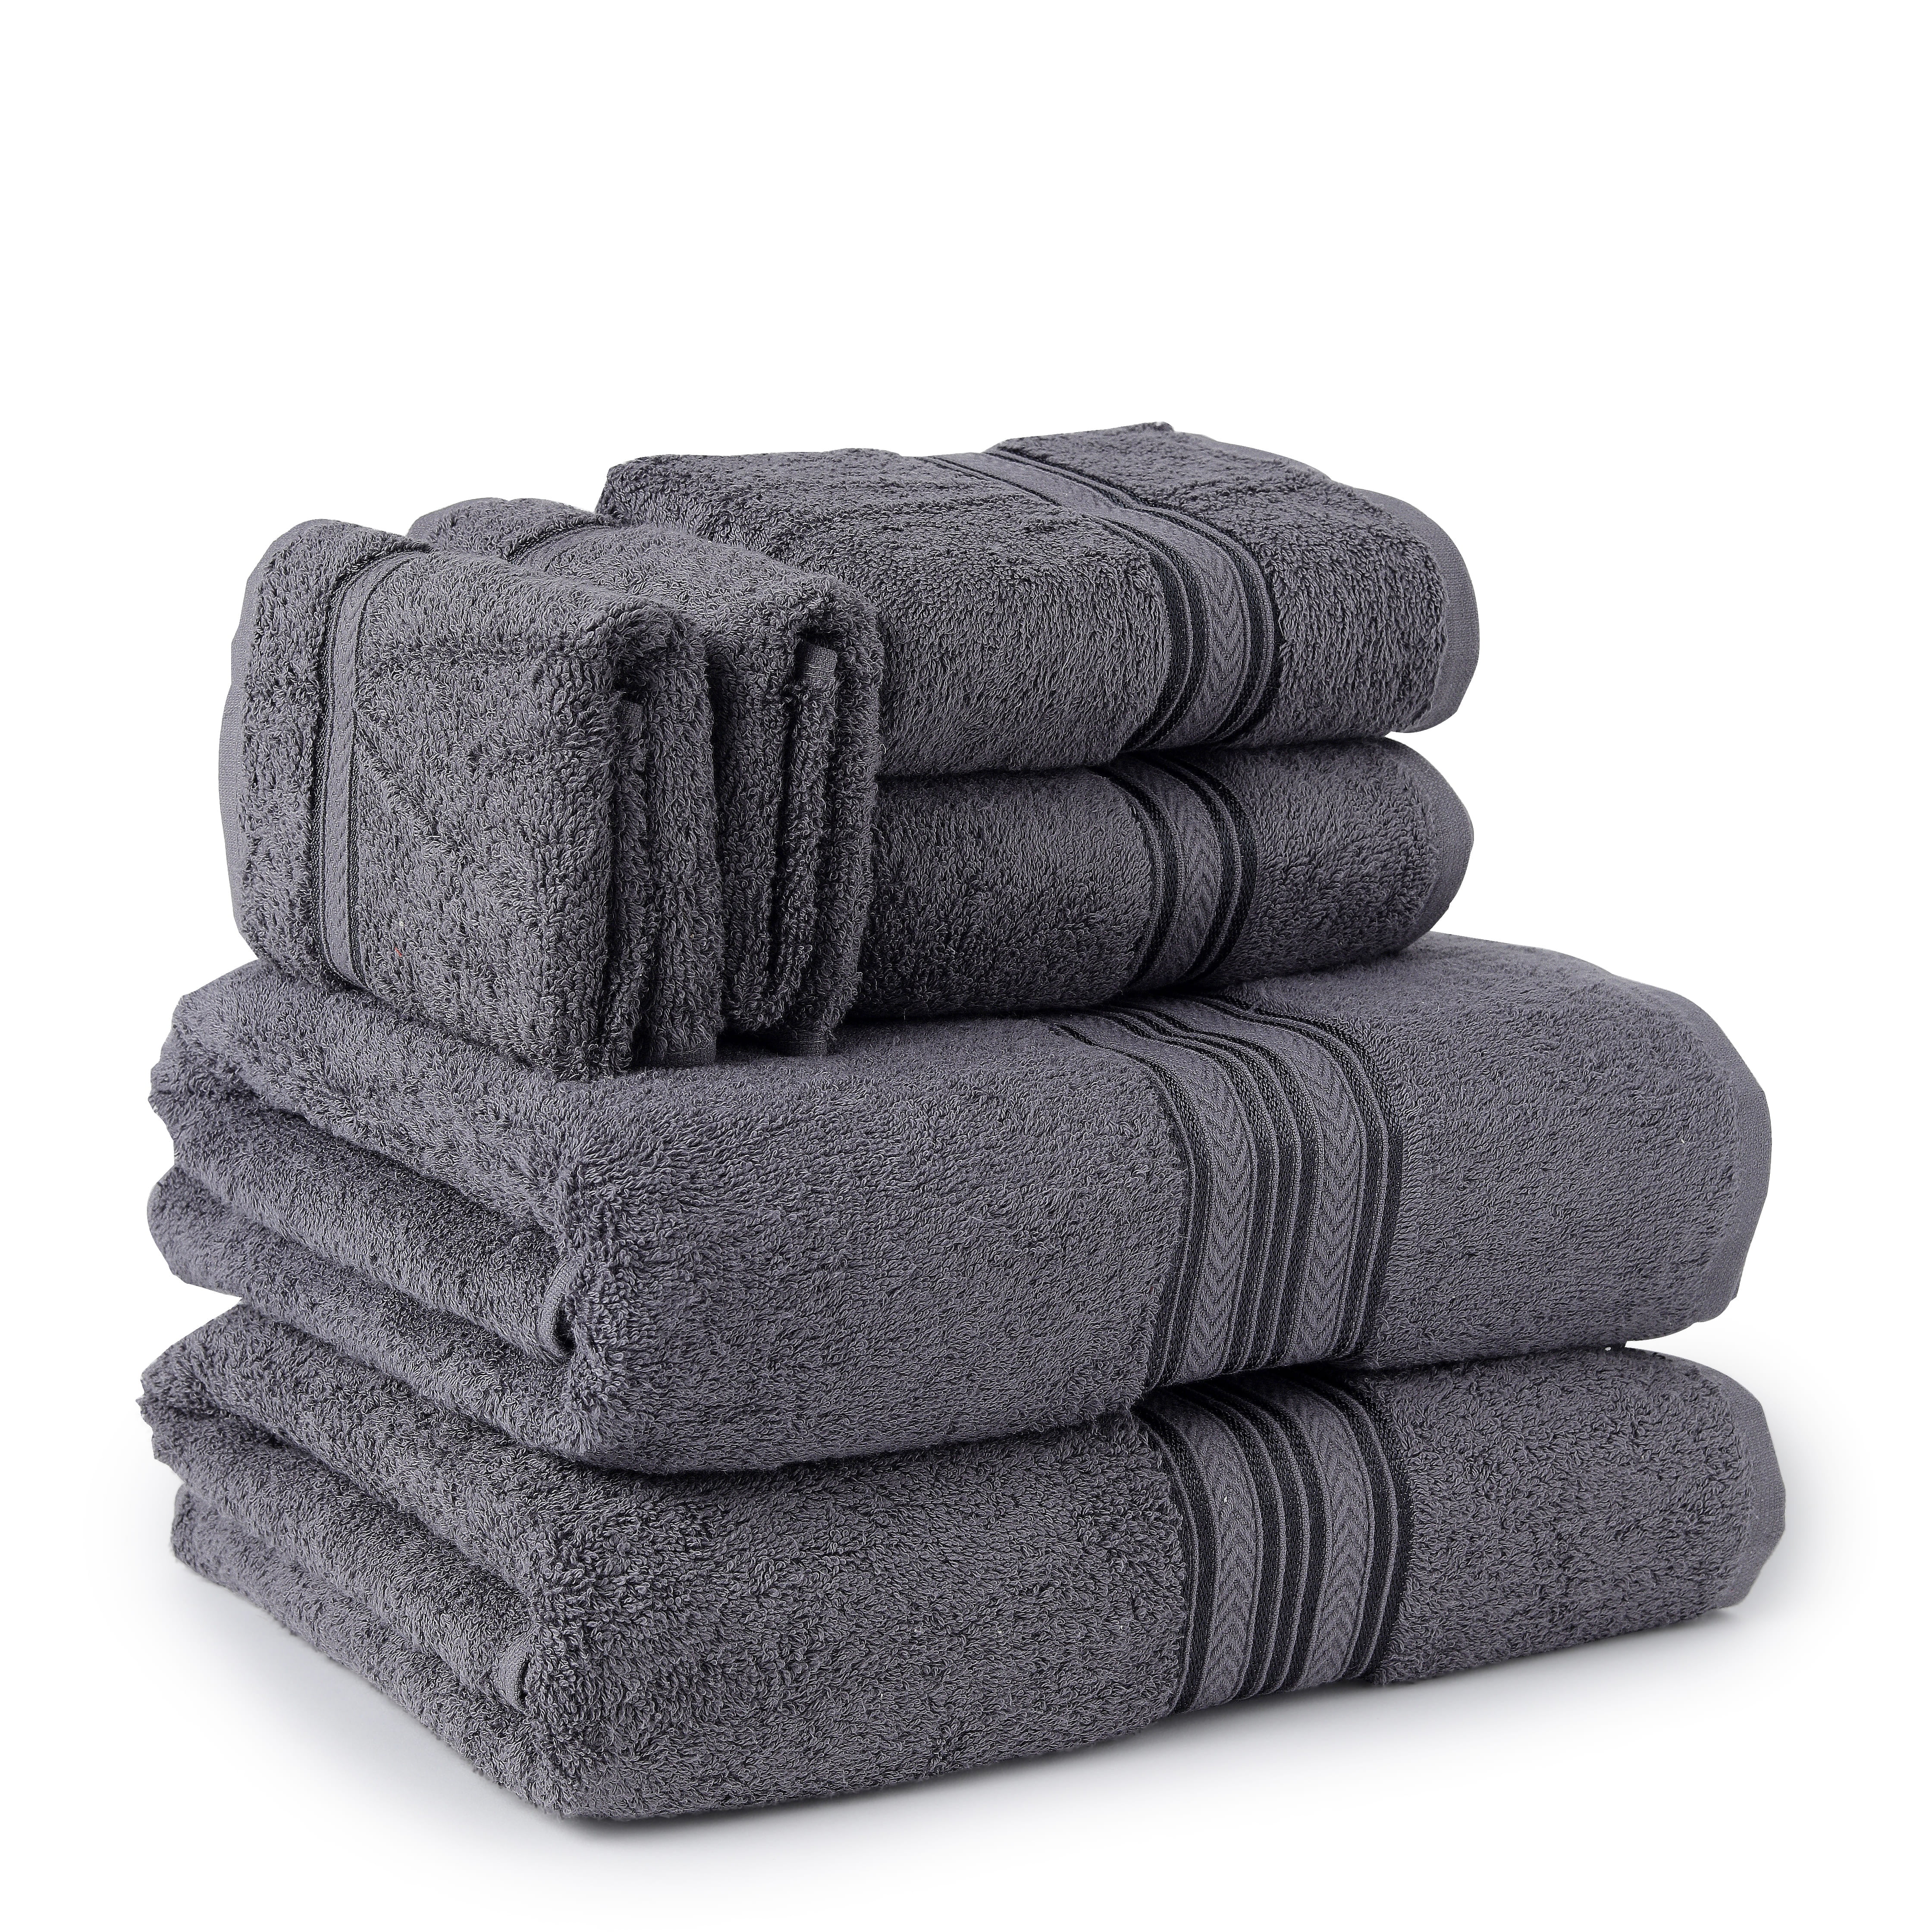 Hotel Collection Ultimate MicroCotton® 6-Pc. Towel Set, Created